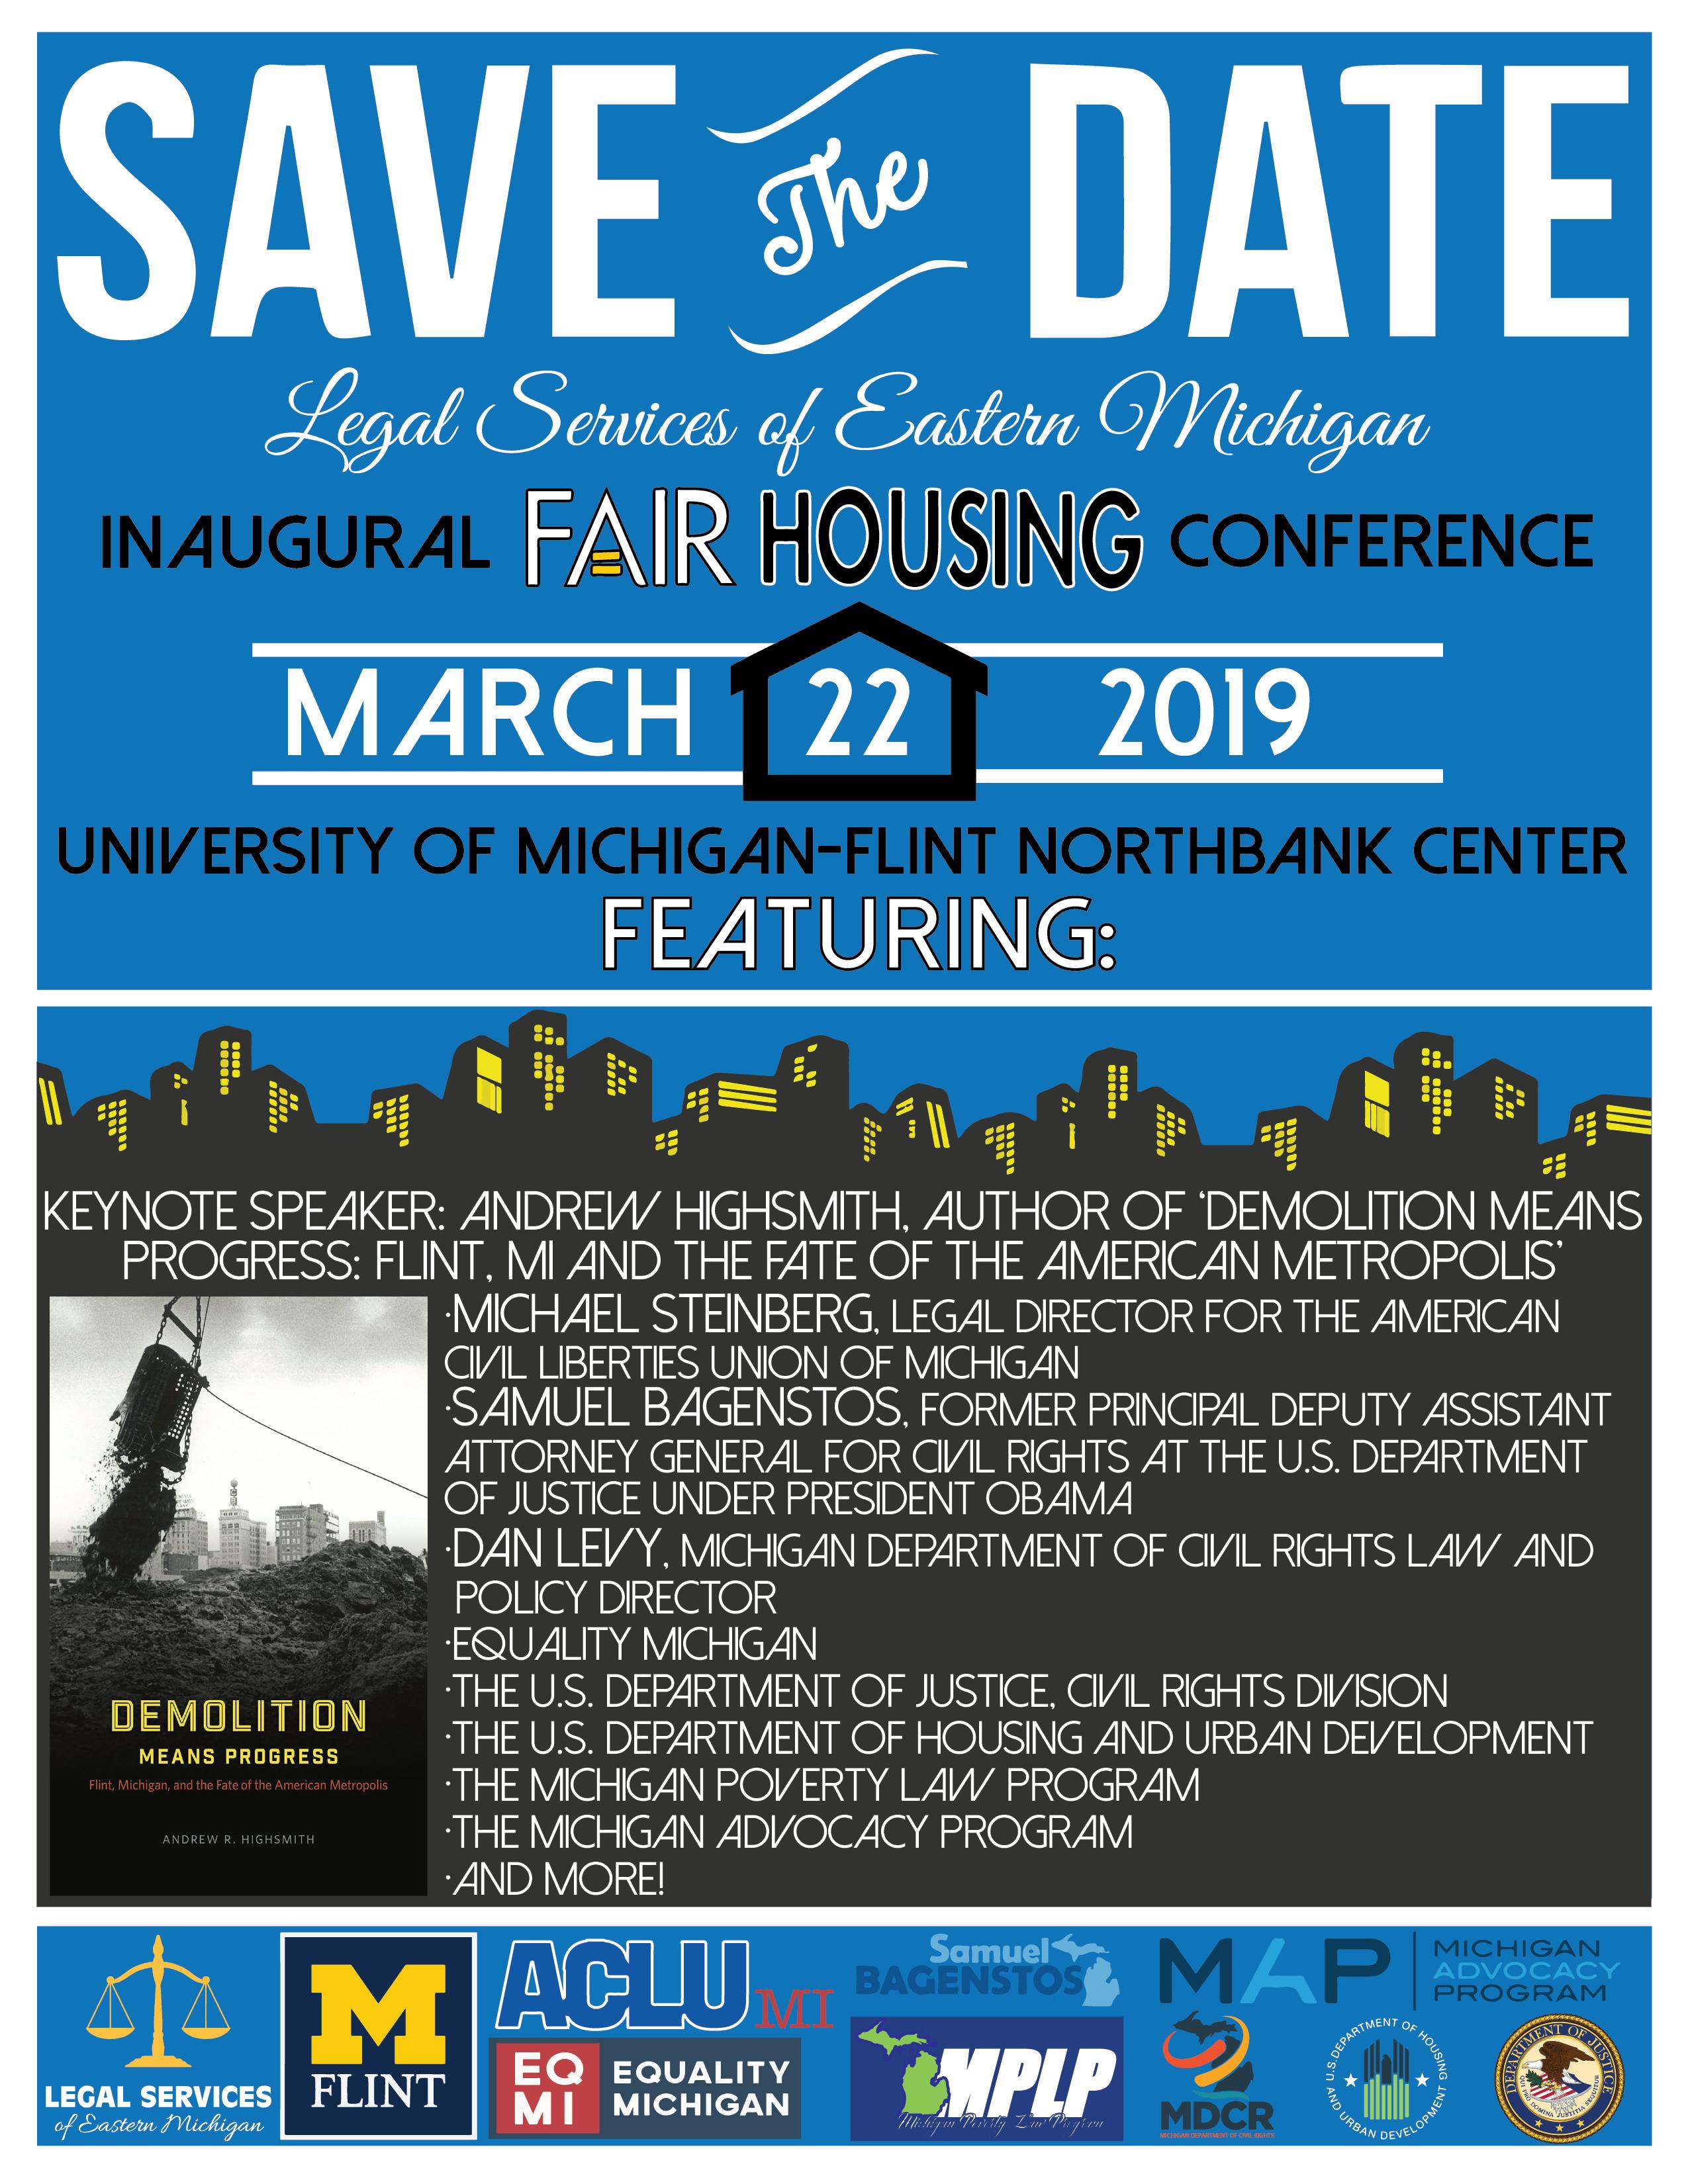 Legal Services of Eastern Michigan Inaugural Fair Housing Conference